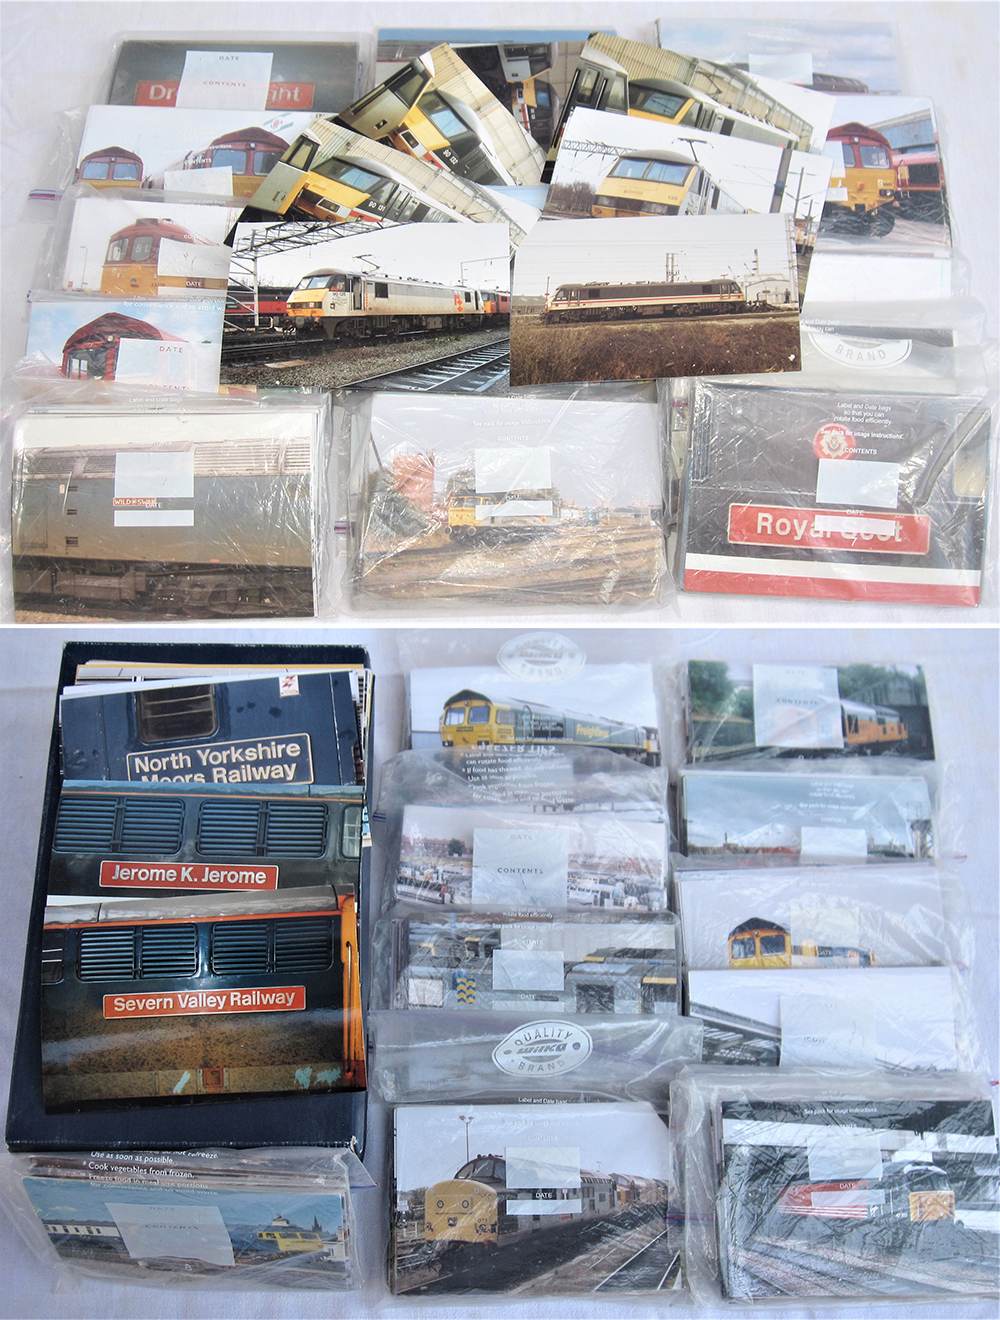 A collection of several hundred photos of modern traction with Locomotive nameplates in situ. Copy